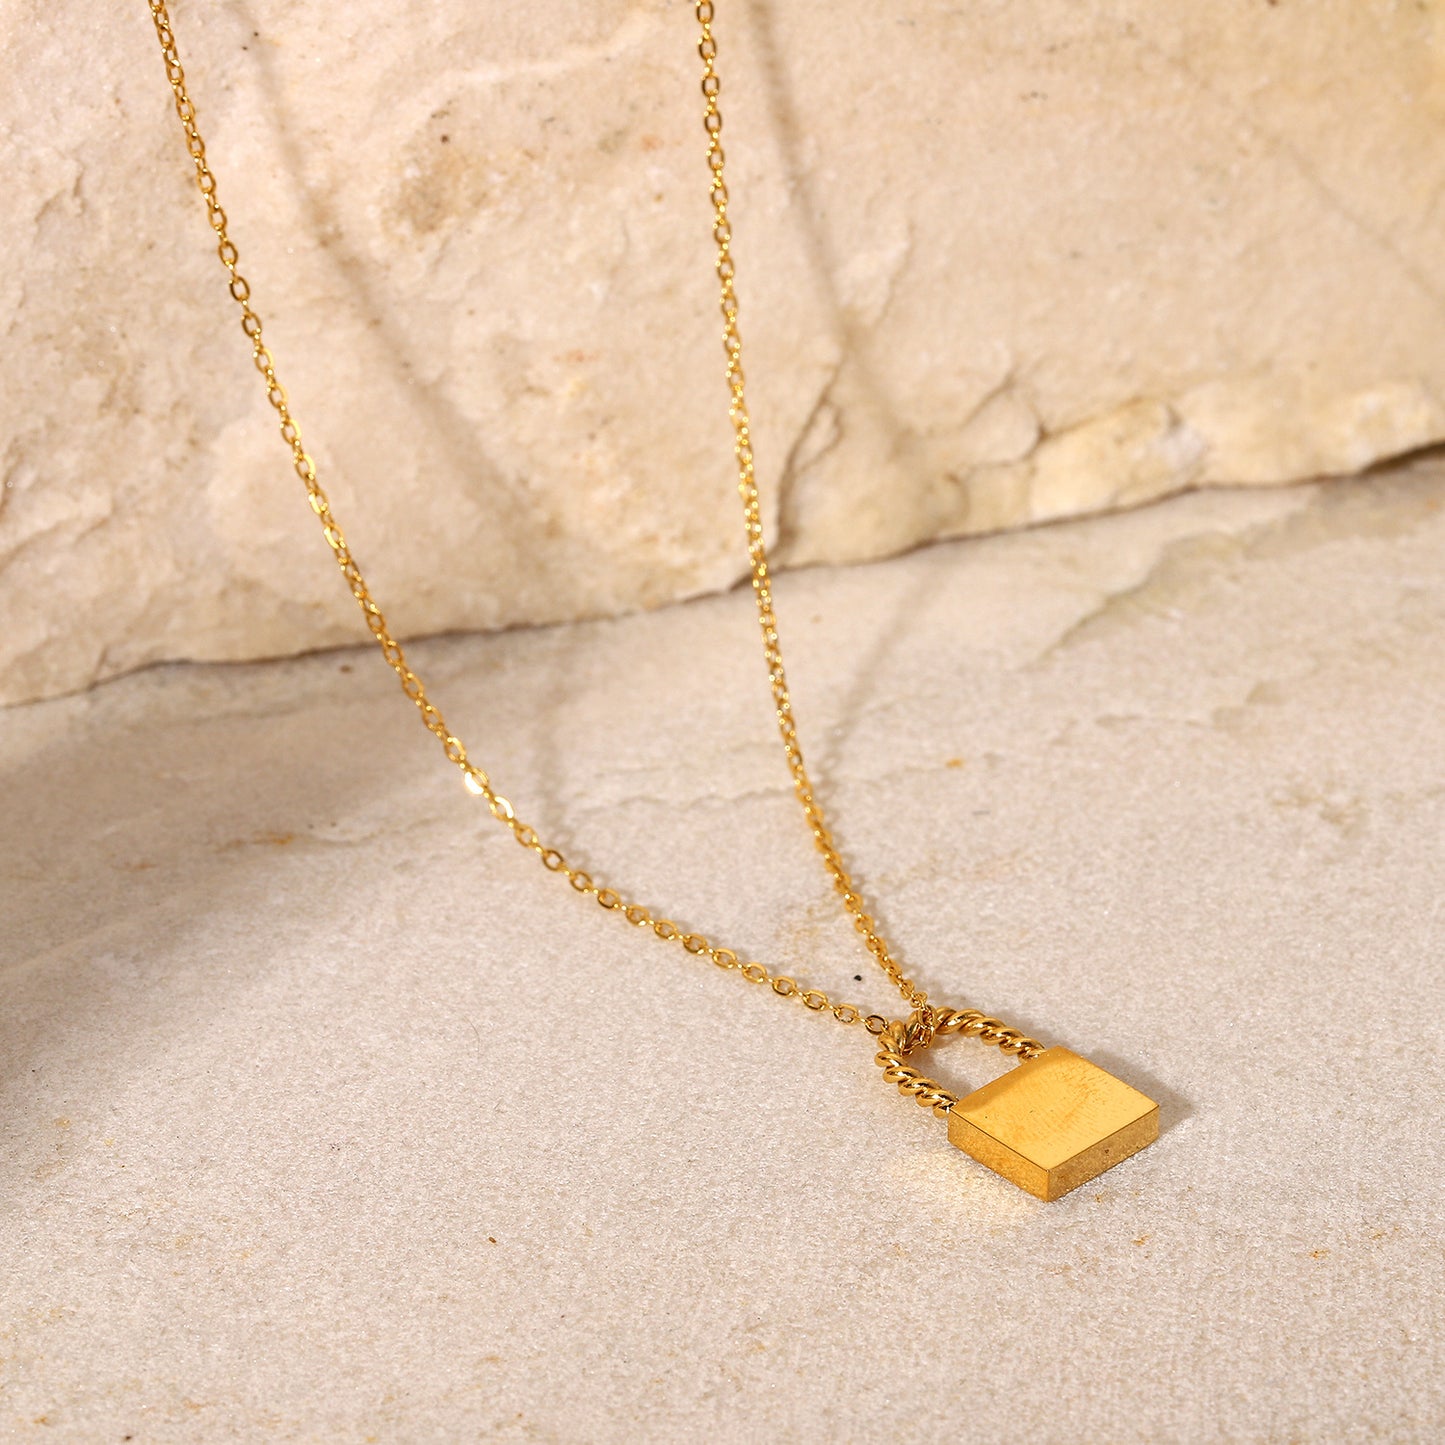 Twist Lock Pendant 18k Gold Plated Necklace